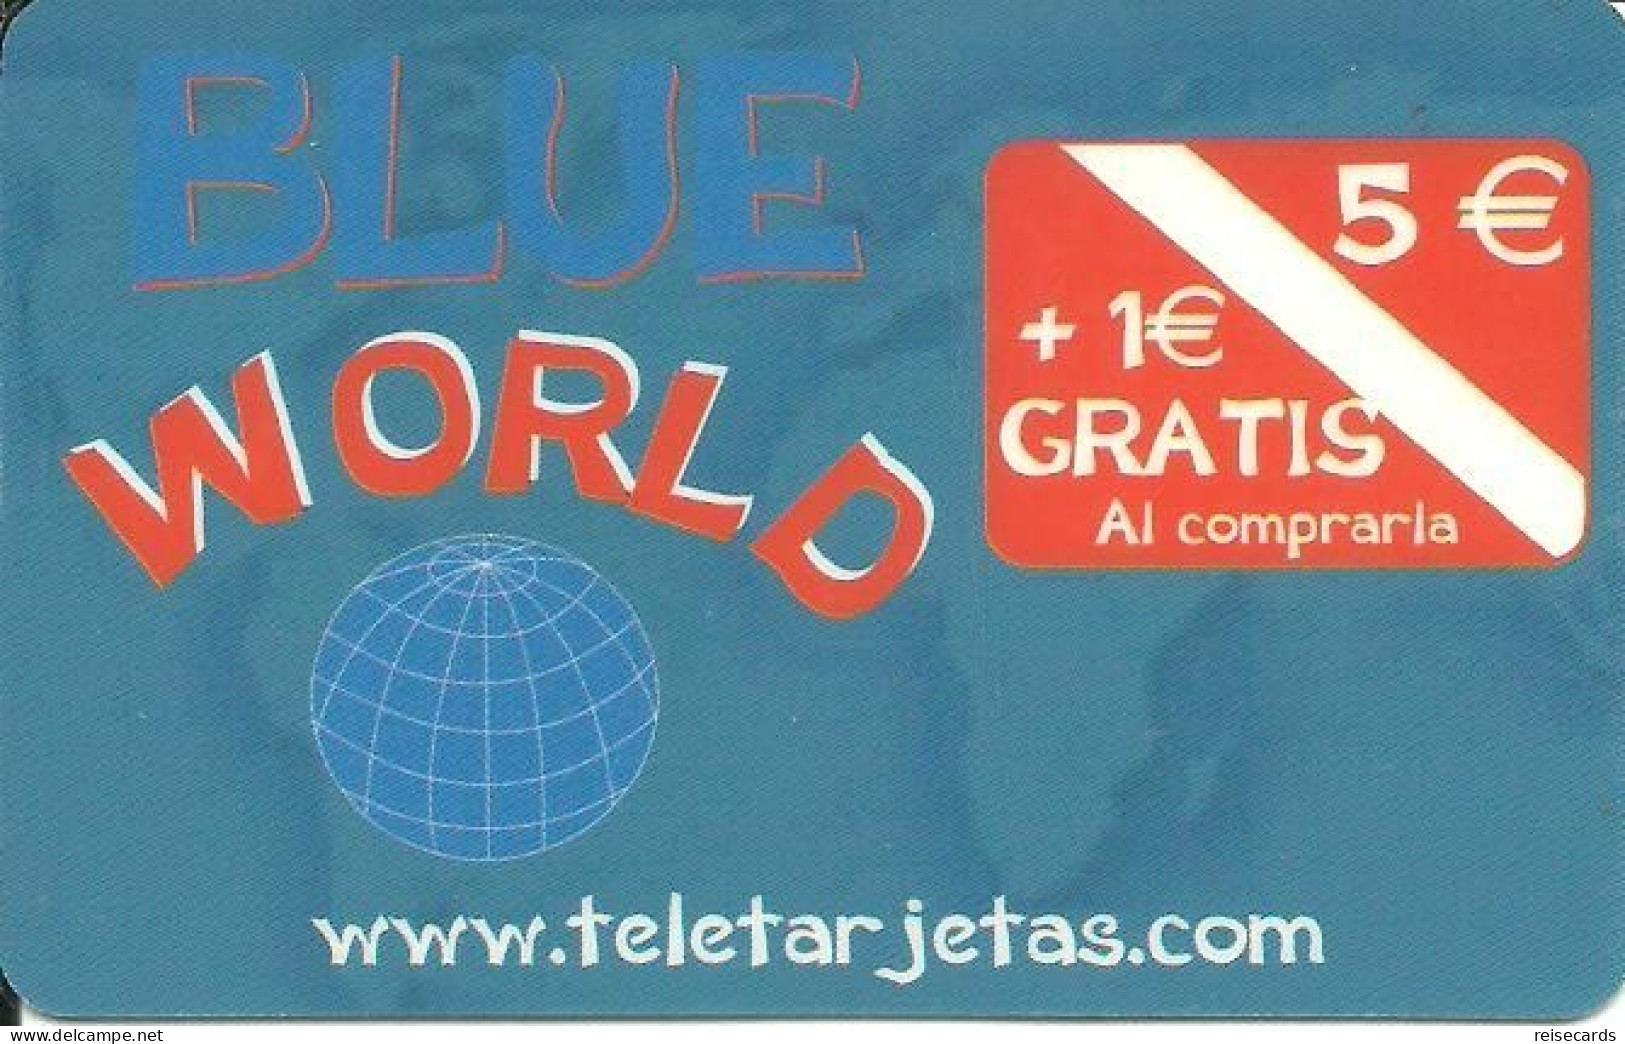 Spain: Prepaid IDT - Blue World 10.08 - Other & Unclassified